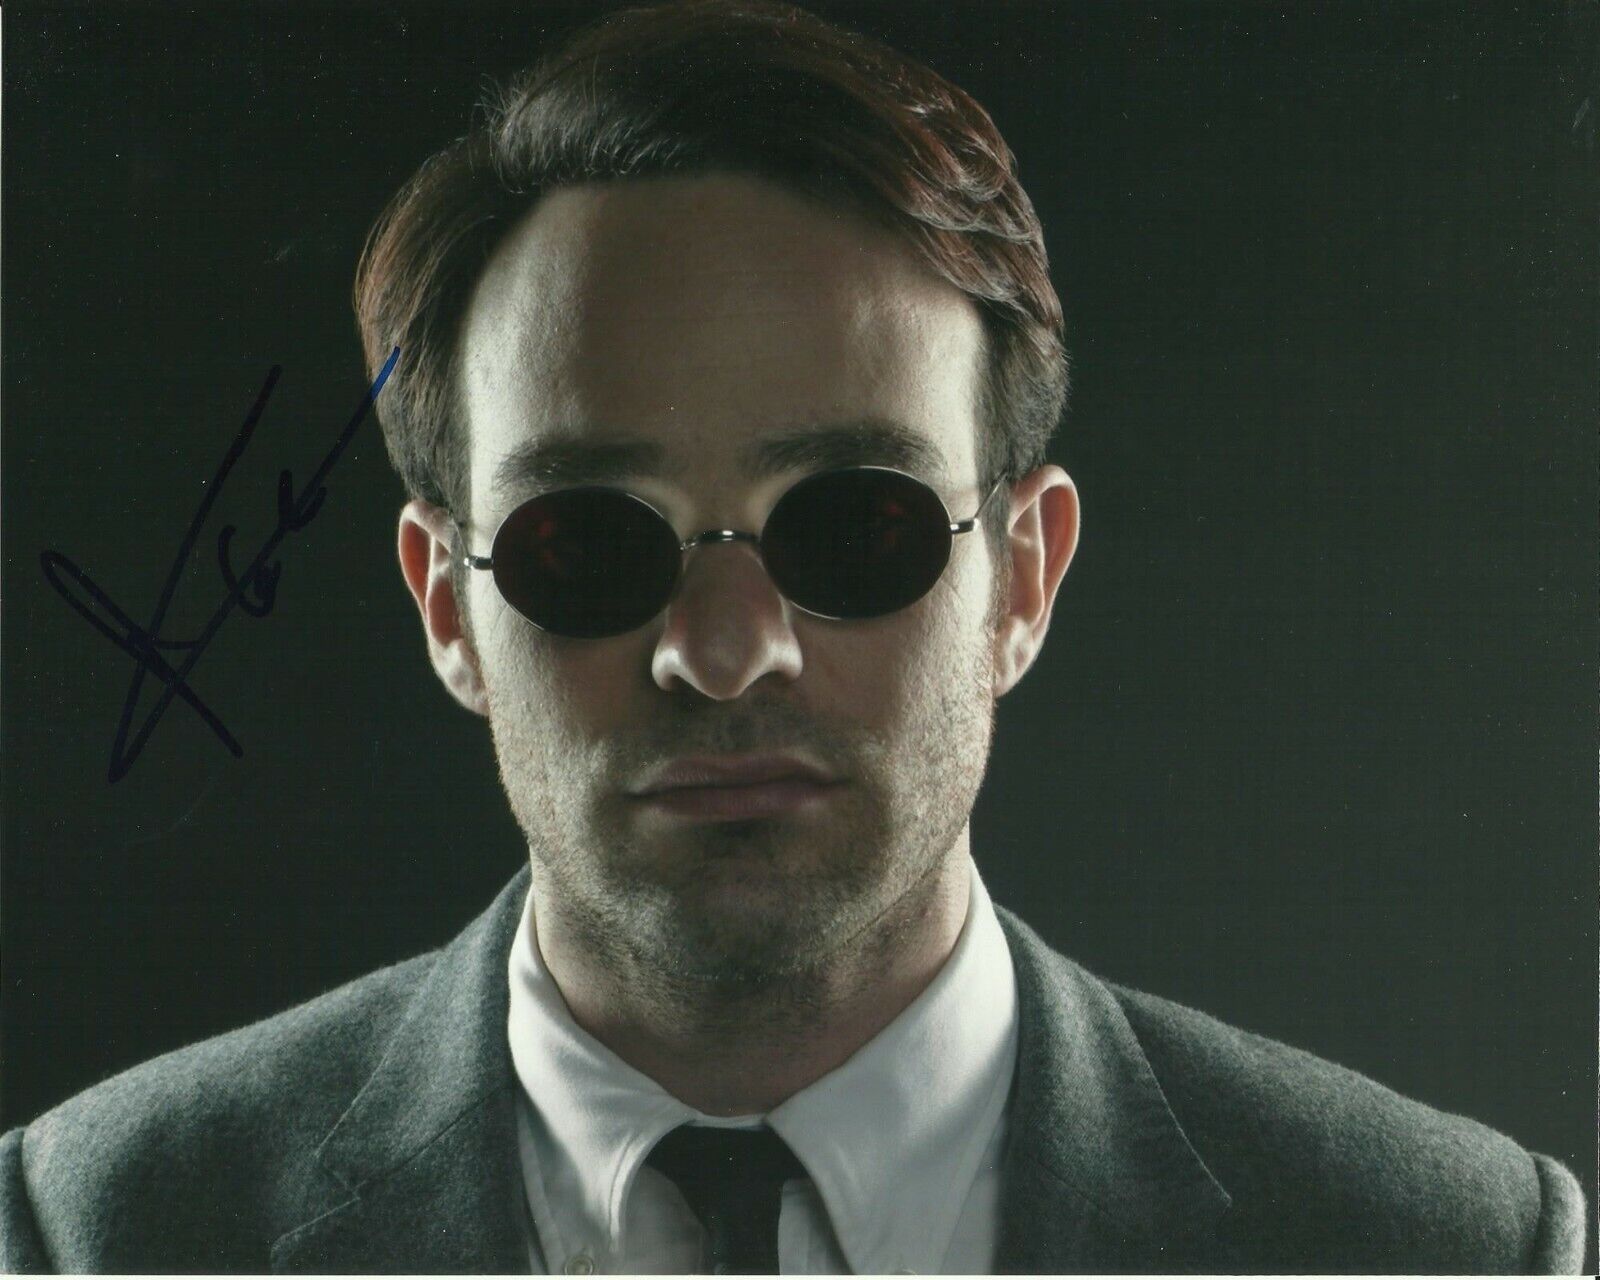 CHARLIE COX SIGNED DAREDEVIL Photo Poster painting UACC REG 242 (7)